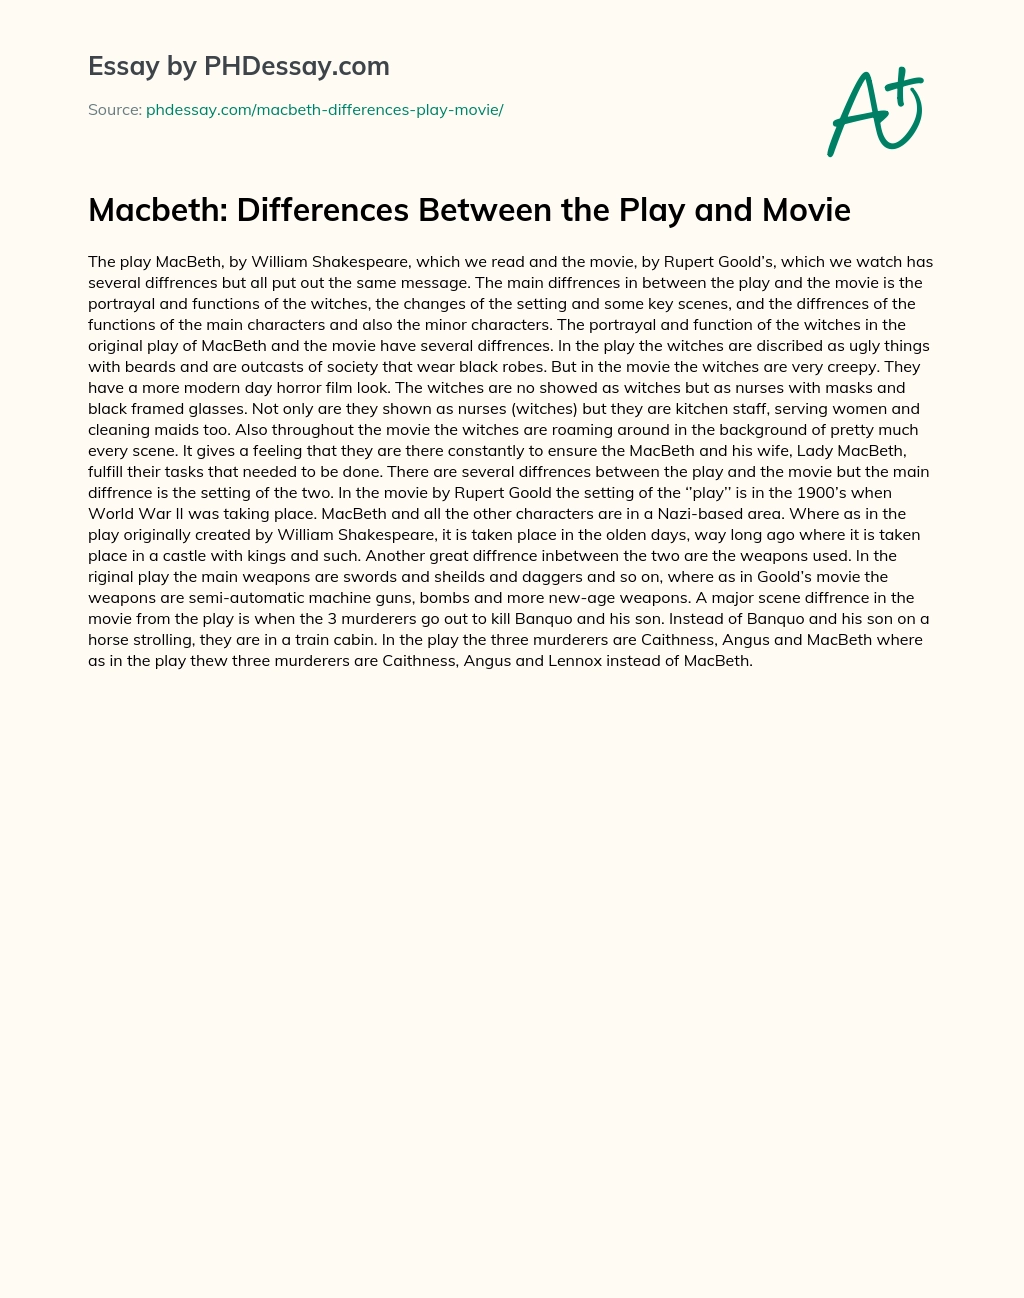 Реферат: Compare And Contrast Macbeth